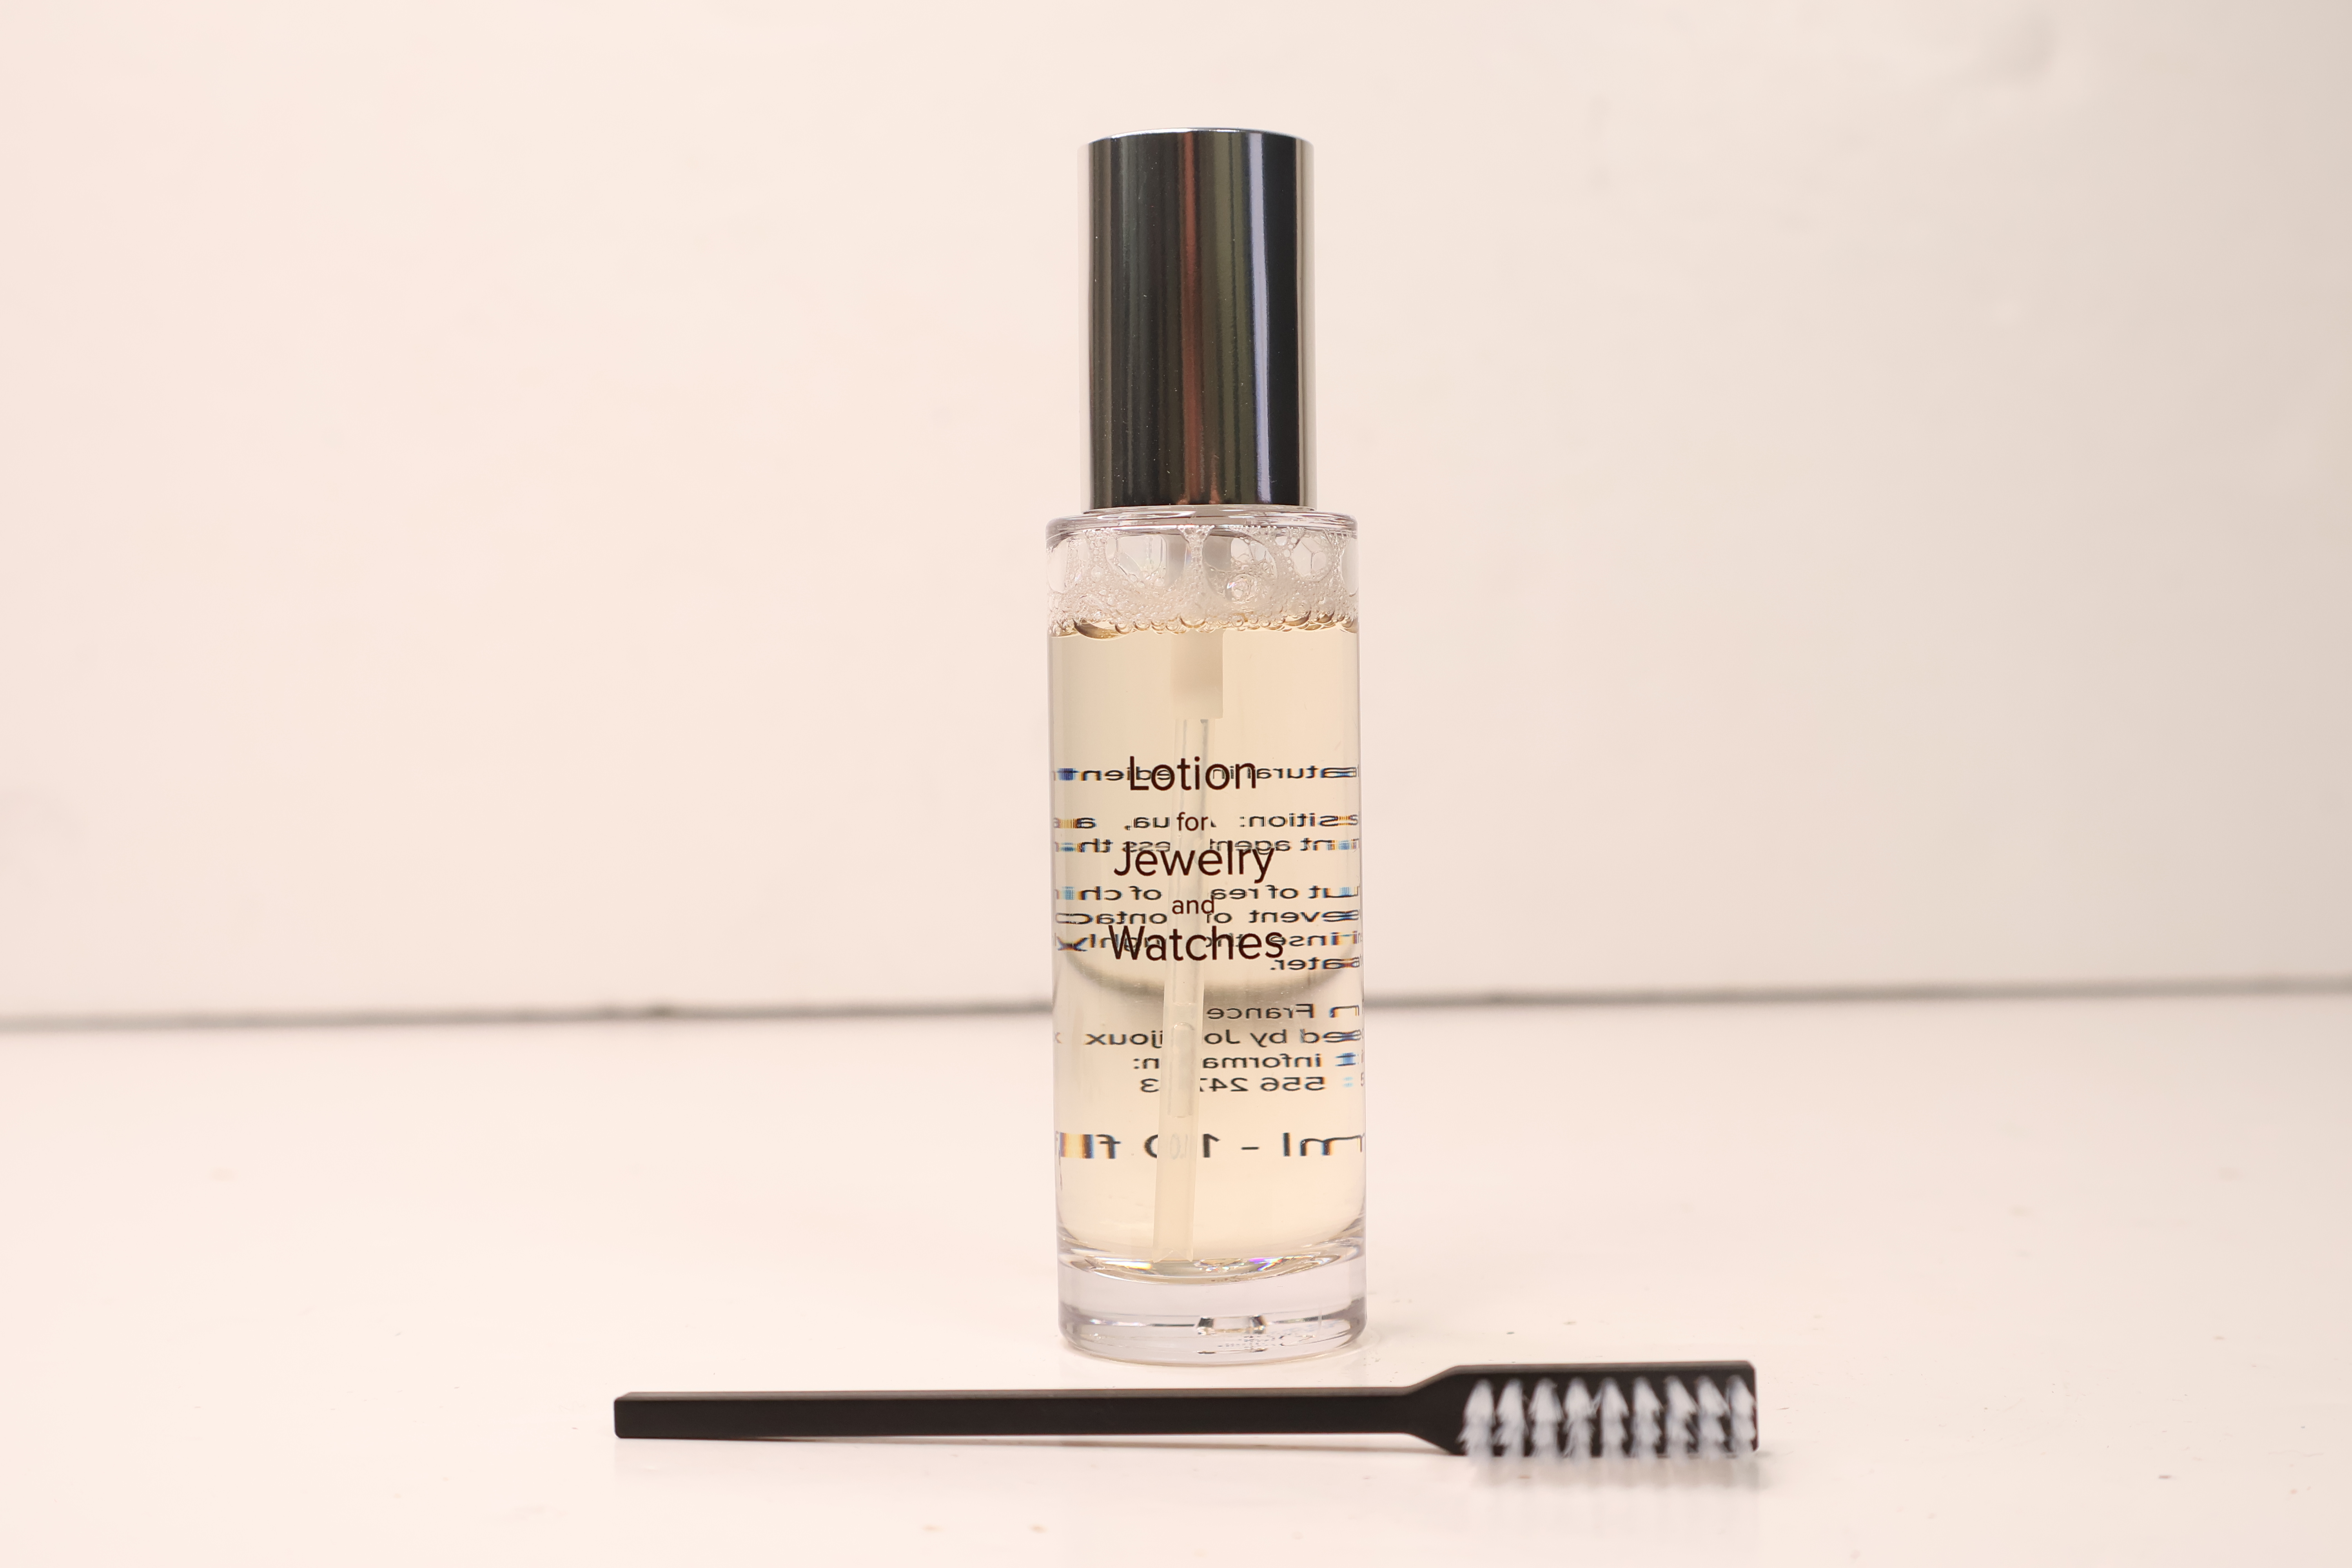 *To Be Sold Without Reserve* Cartier Cleaning Kit - Image 3 of 4